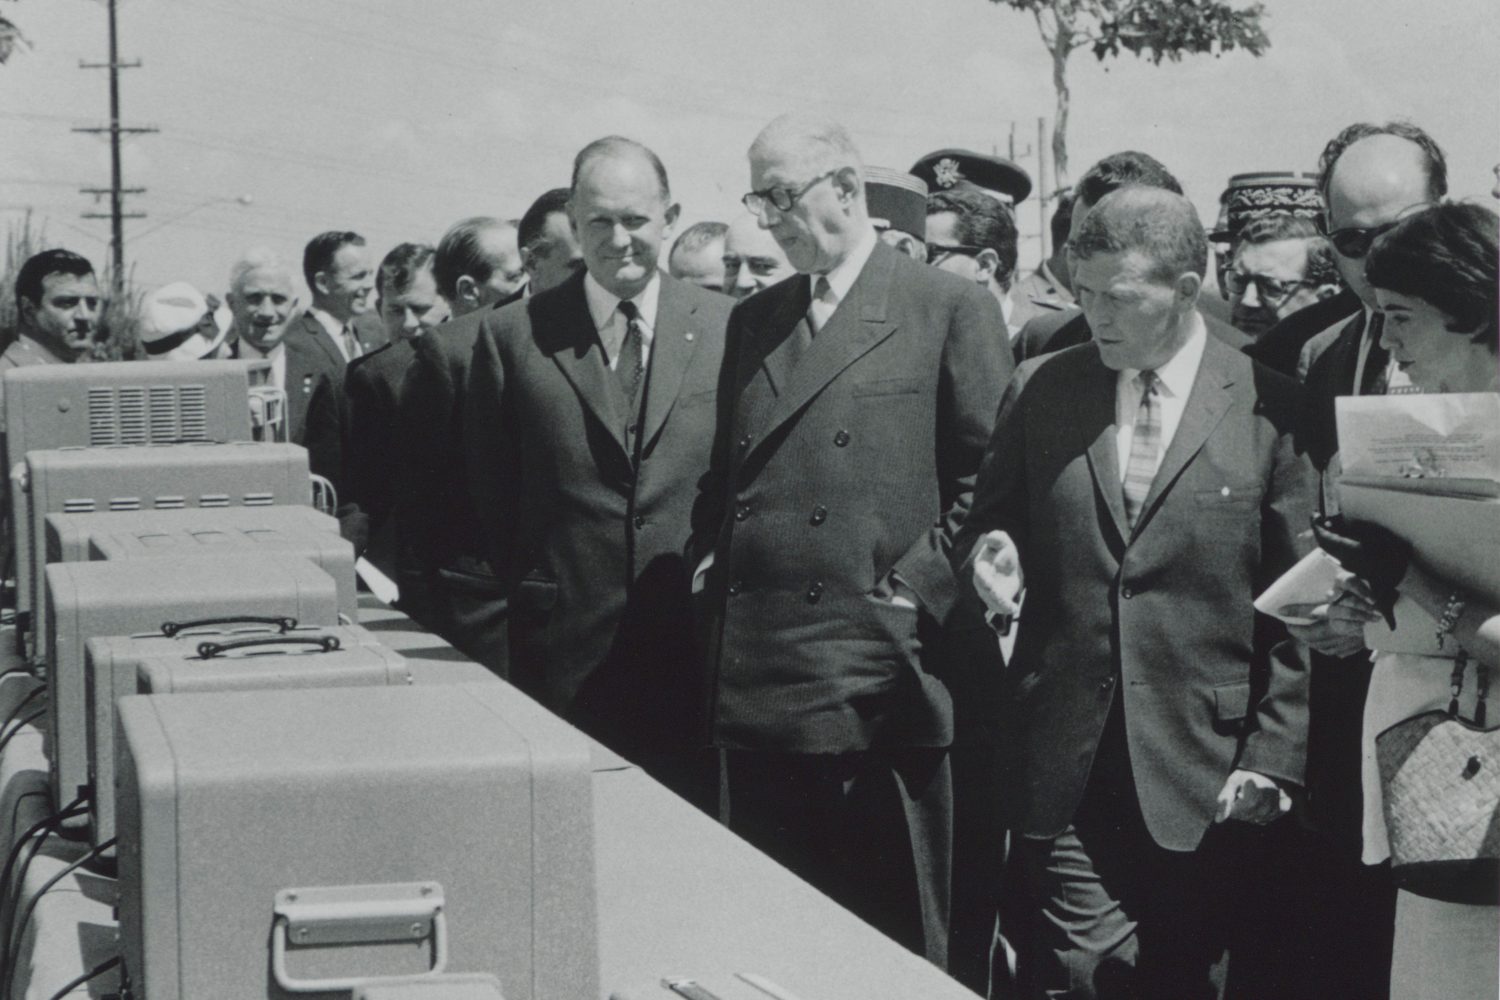 Bill Hewlett shows Charles de Gaulle some products during a tour of HP's headquarters in Palo Alto in 1960.